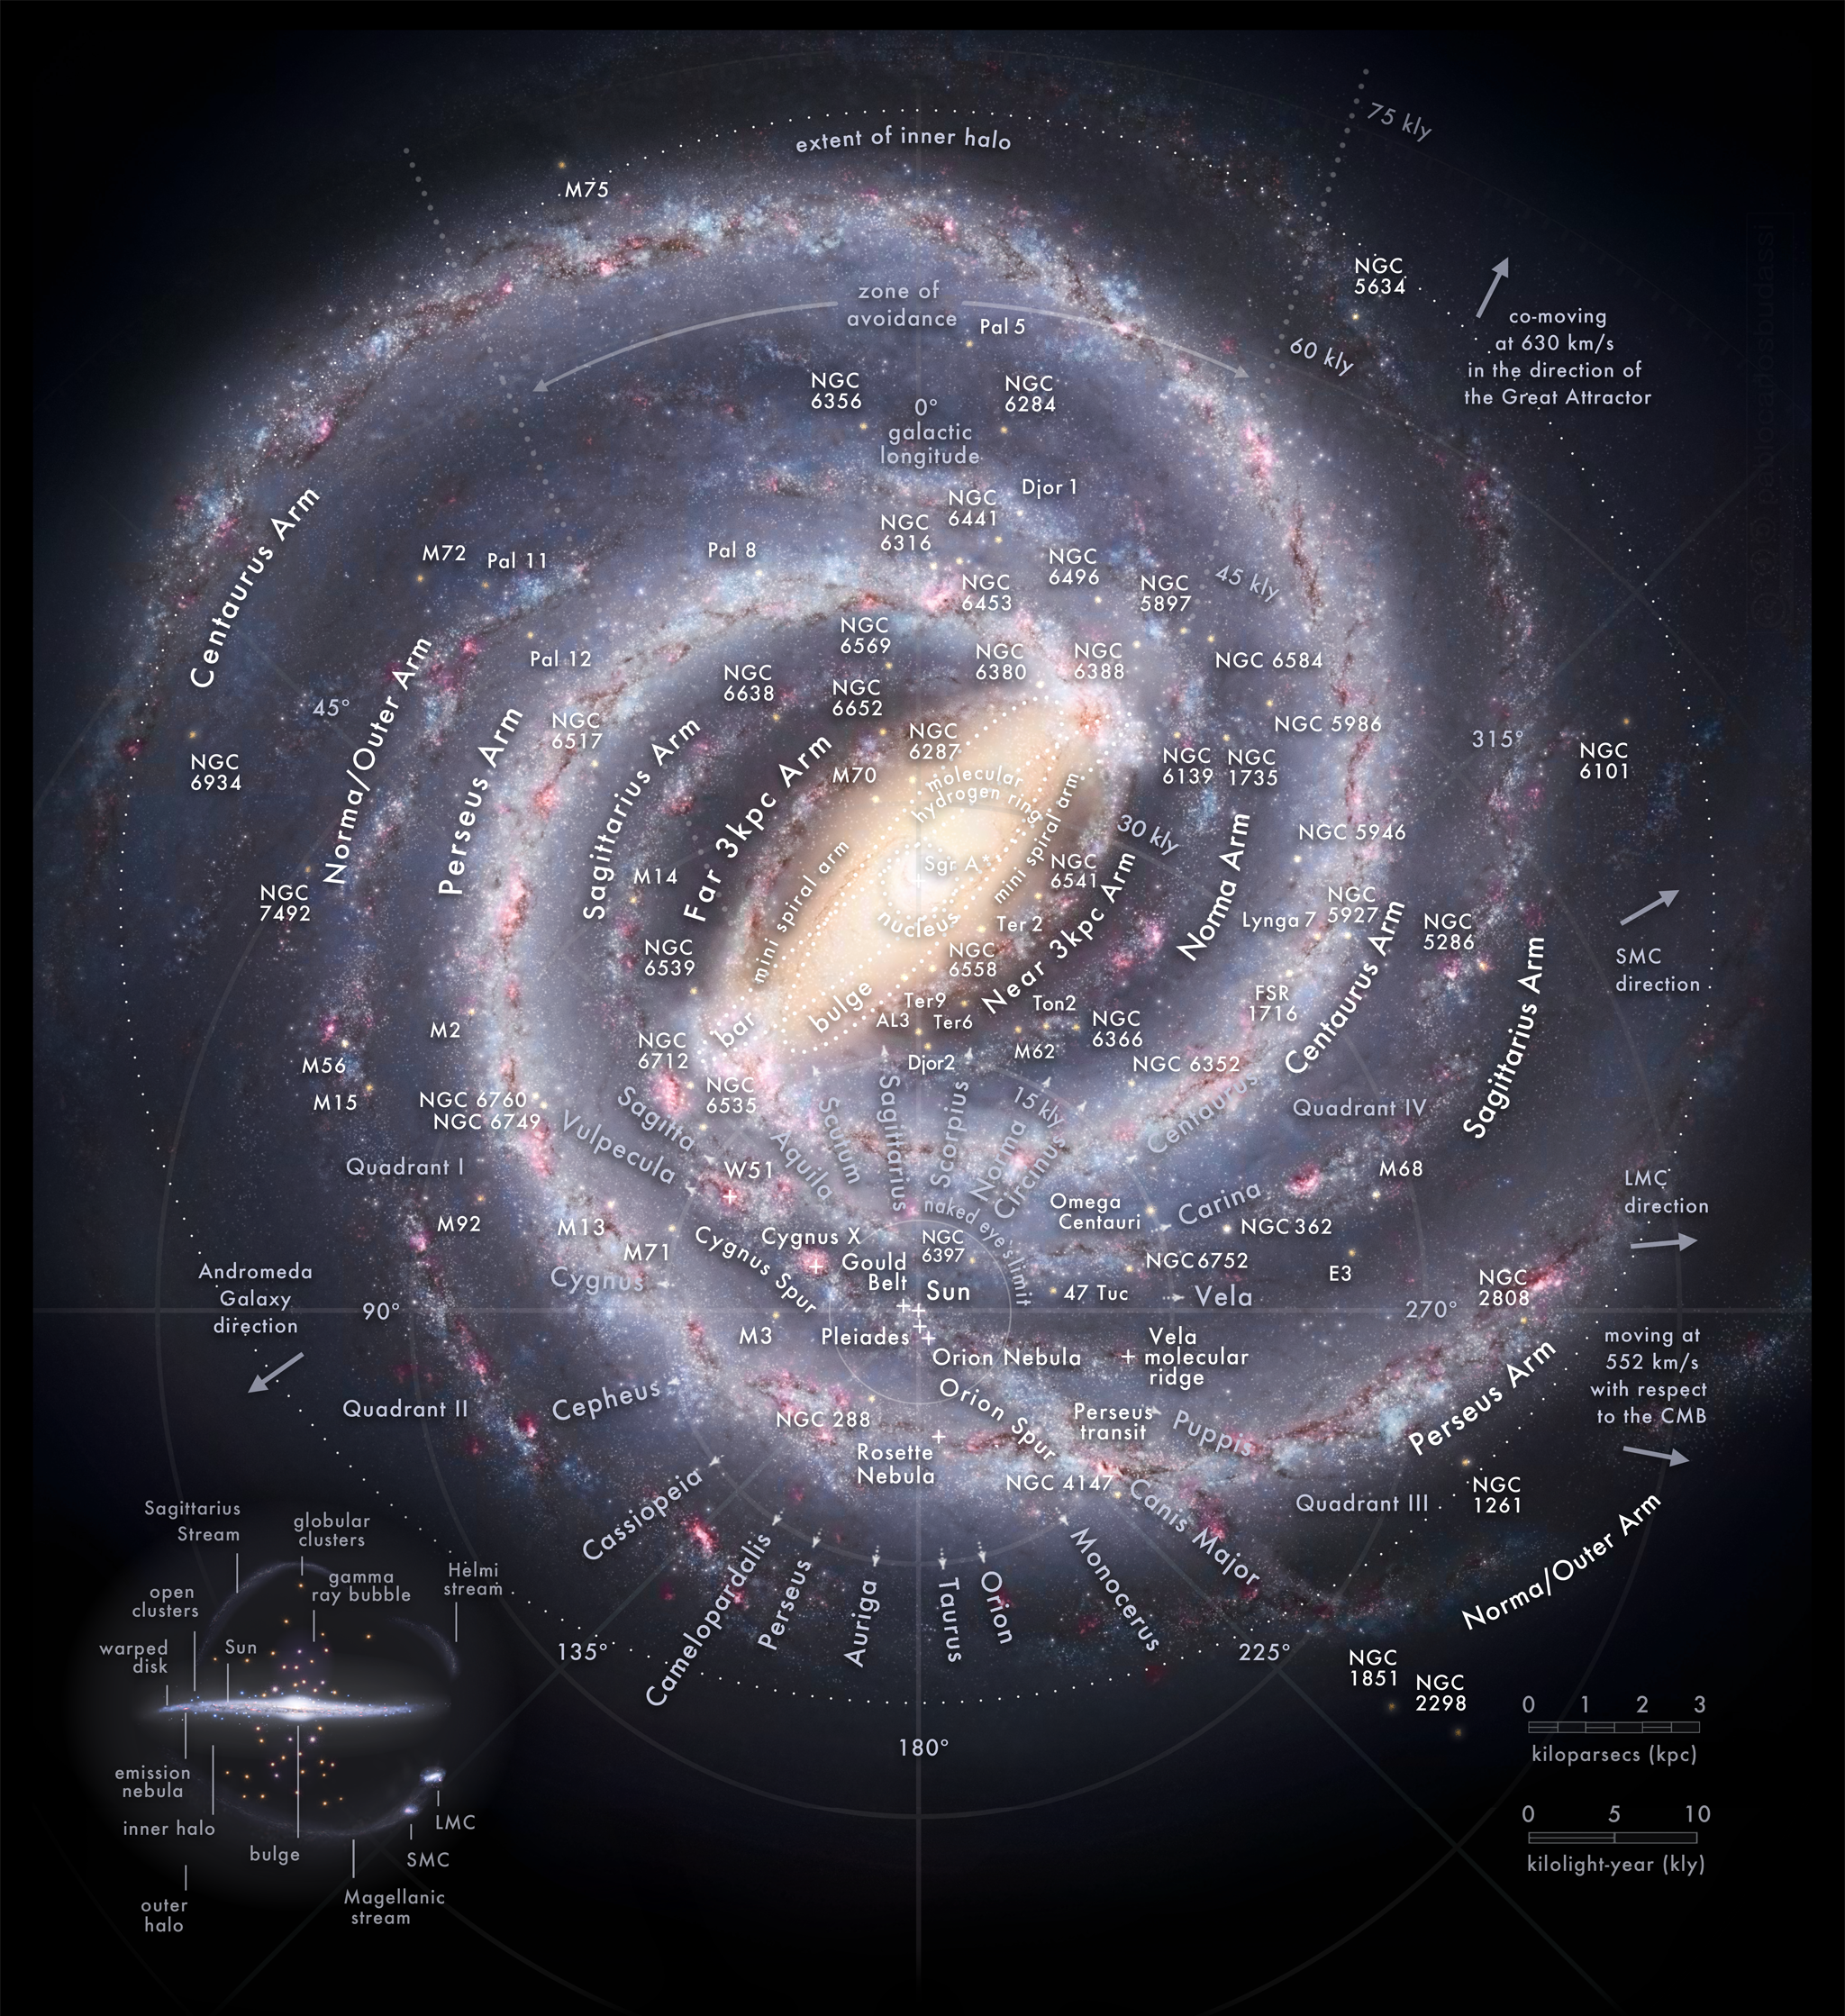 Map of the Milky Way Galaxy with the constellations that cross the galactic plane in each direction and the known most prominent components annotated including main arms, spurs, bar, nucleus/bulge, and notable nebulae. (Credit: Pablo Carlos Budassi)